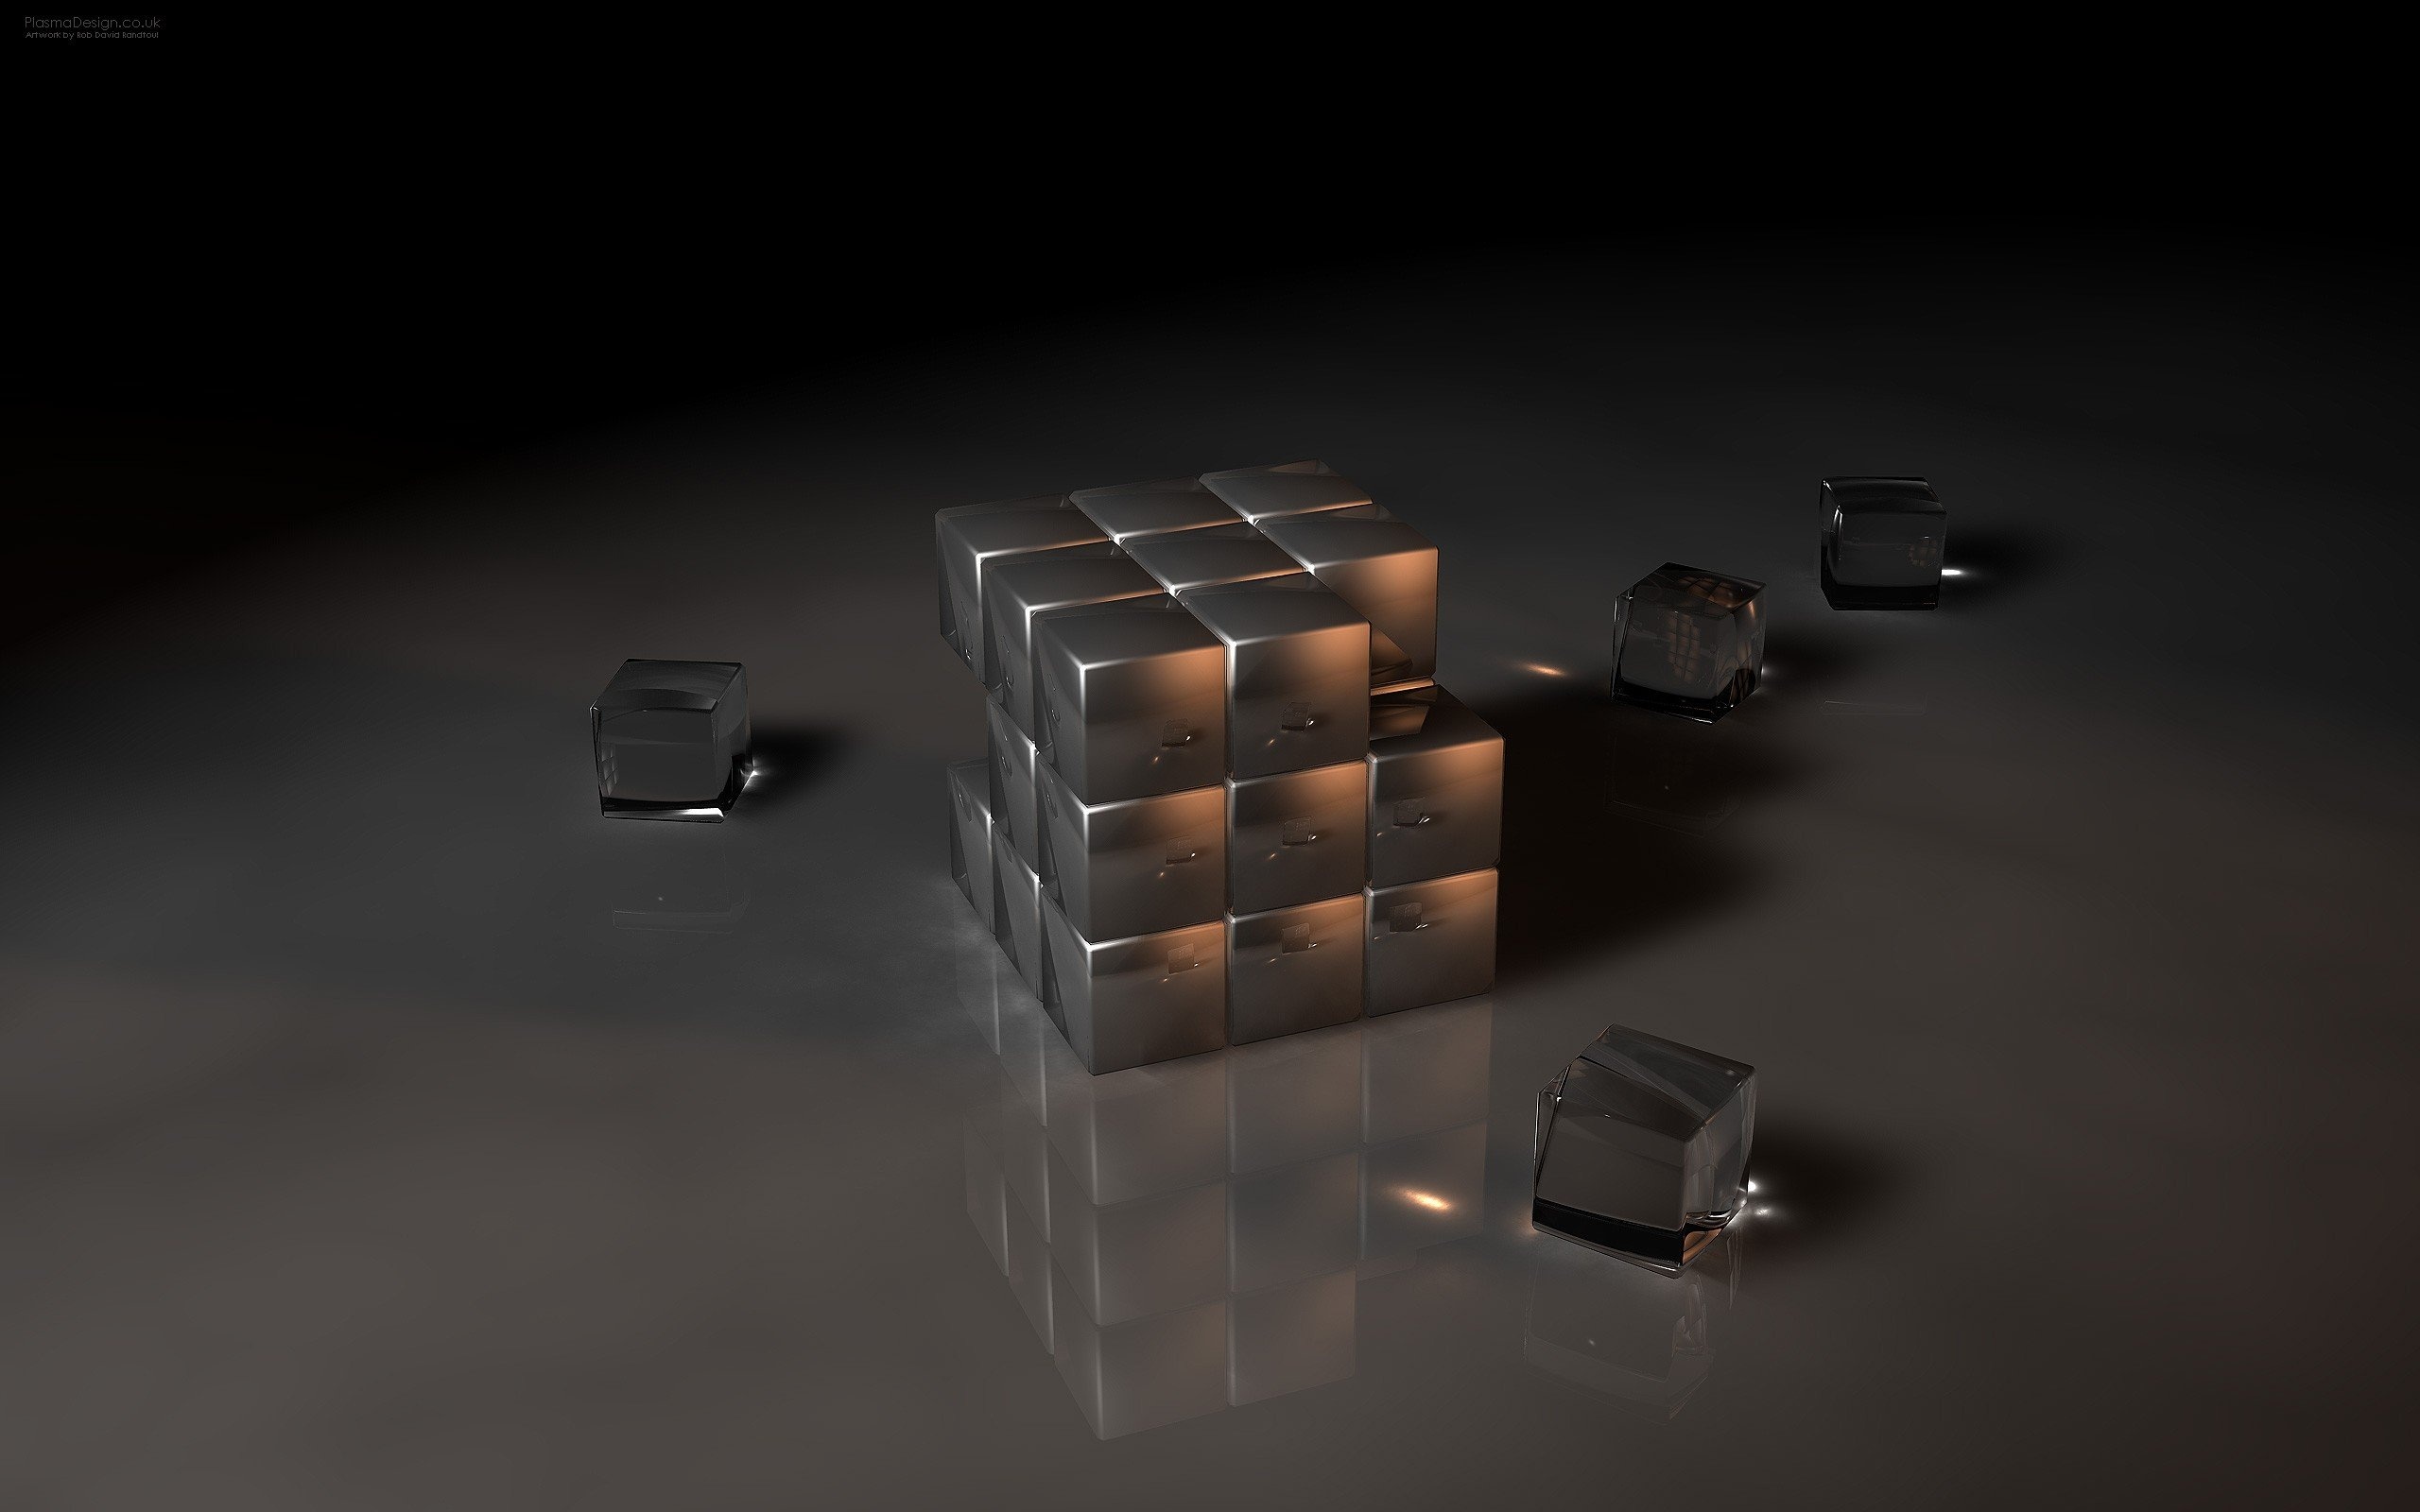 Cube HD wallpapers, Desktop and mobile images, Photos, Pictures, Backgrounds, 2560x1600 HD Desktop